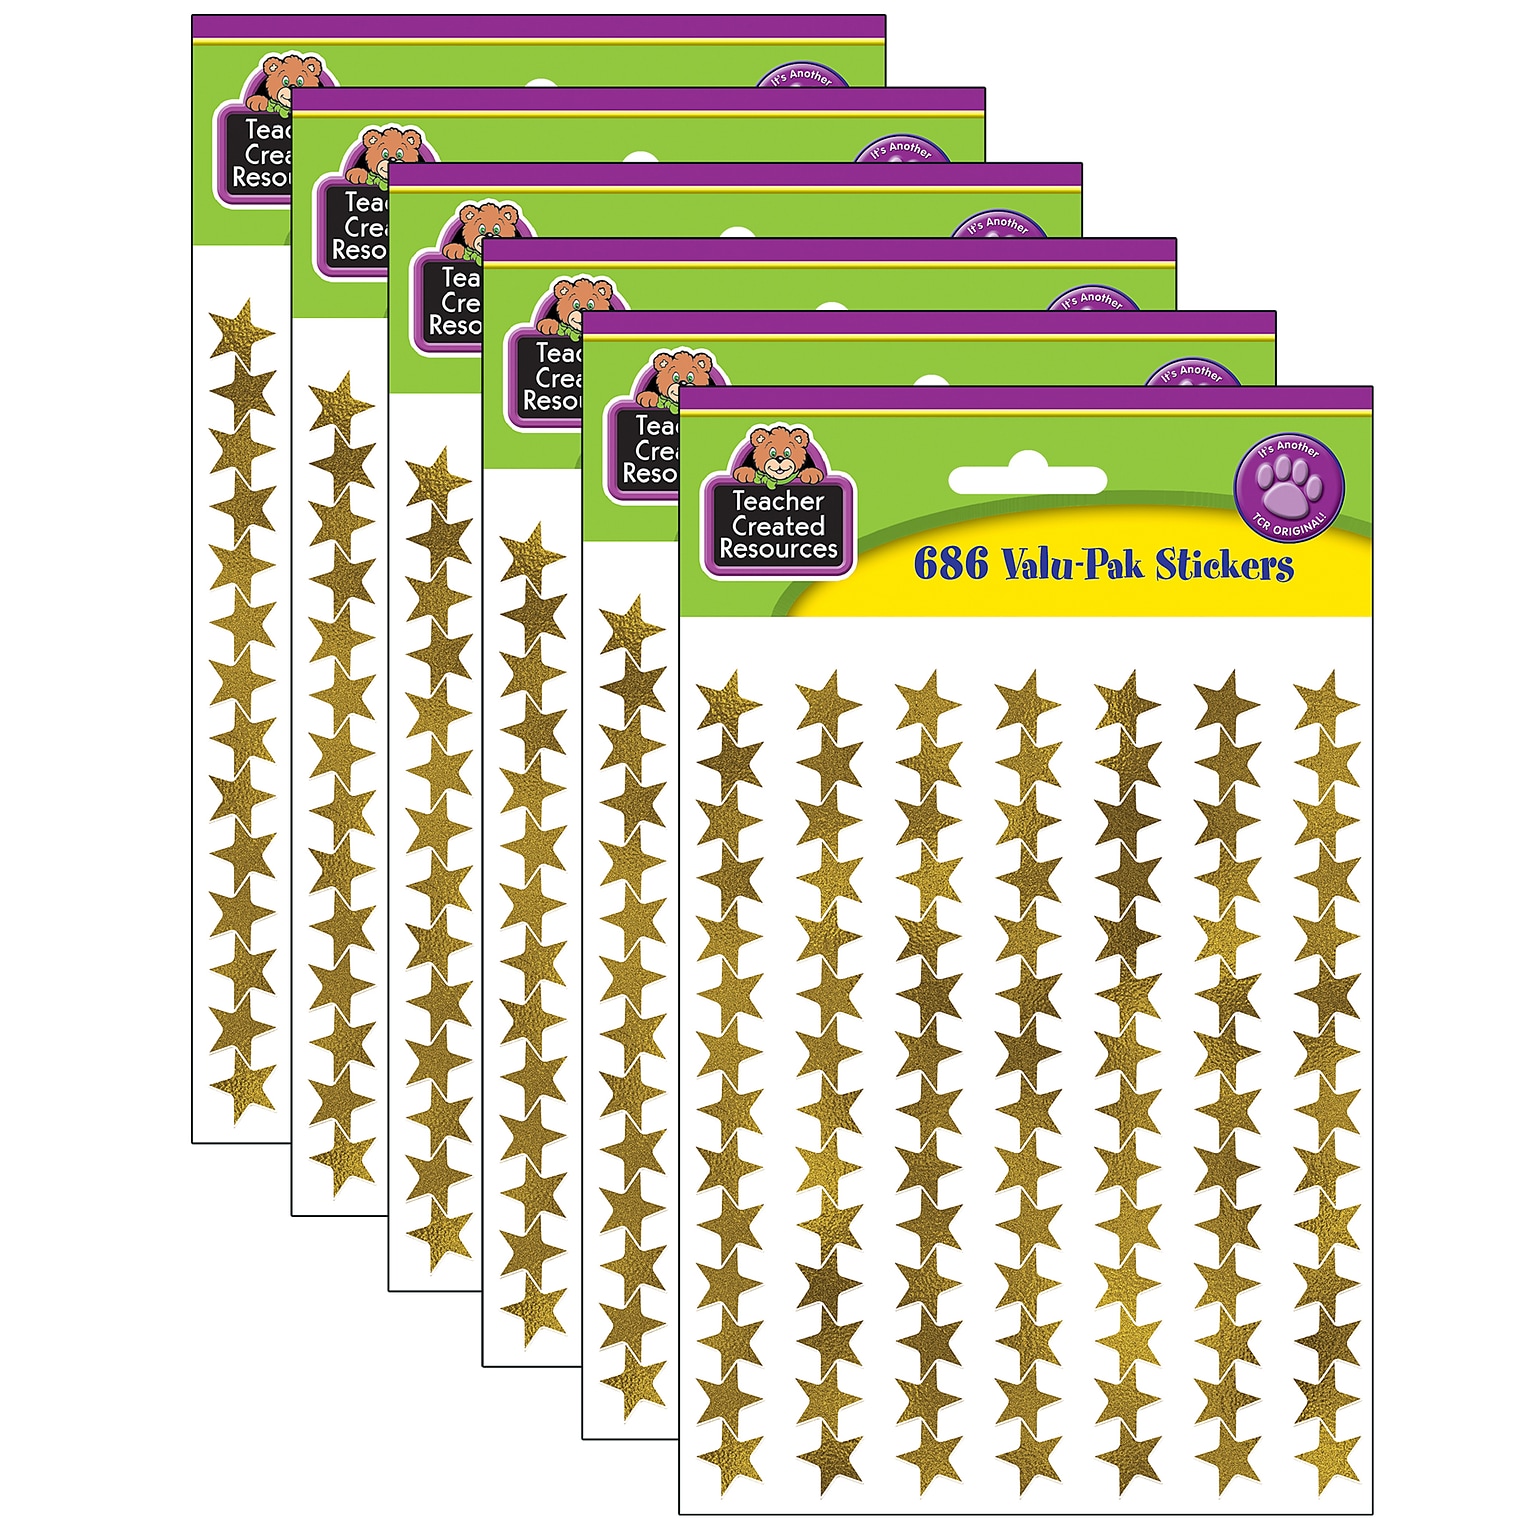 Teacher Created Resources Valu-Pak Gold Foil Star Stickers, Gold, 686/Pack, 6 Packs (TCR5799-6)